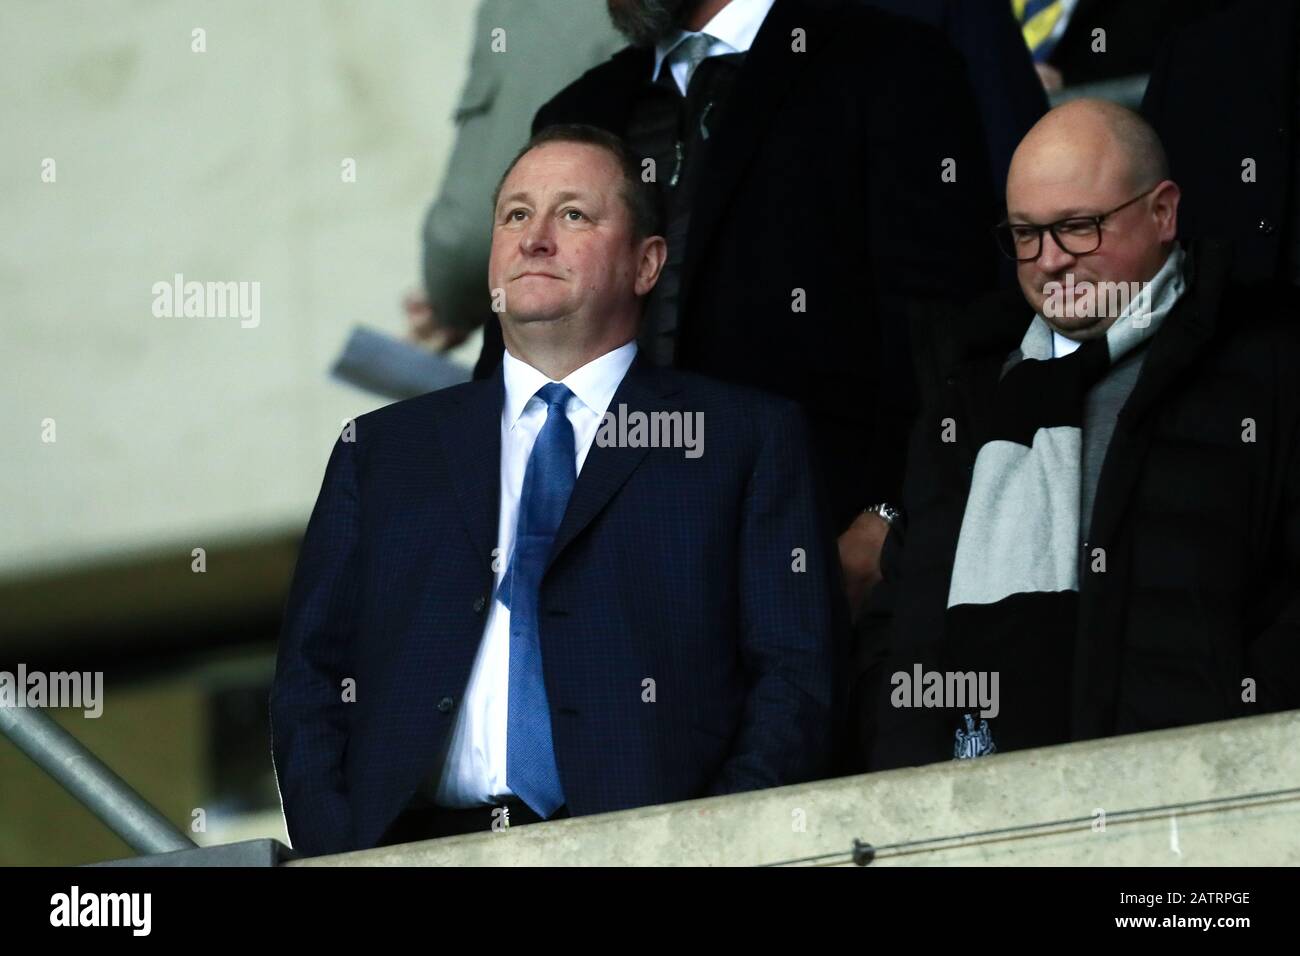 Oxford, Oxfordshire, UK. 4th Feb, 2020. Newcastle owner Mike Ashley attends the FA Cup Fourth Round replay between Oxford United and Newcastle United at the Kassam Stadium, Oxford on Tuesday 4th February 2020. (Credit: Leila Coker | MI News) Photograph may only be used for newspaper and/or magazine editorial purposes, license required for commercial use Credit: MI News & Sport /Alamy Live News Stock Photo